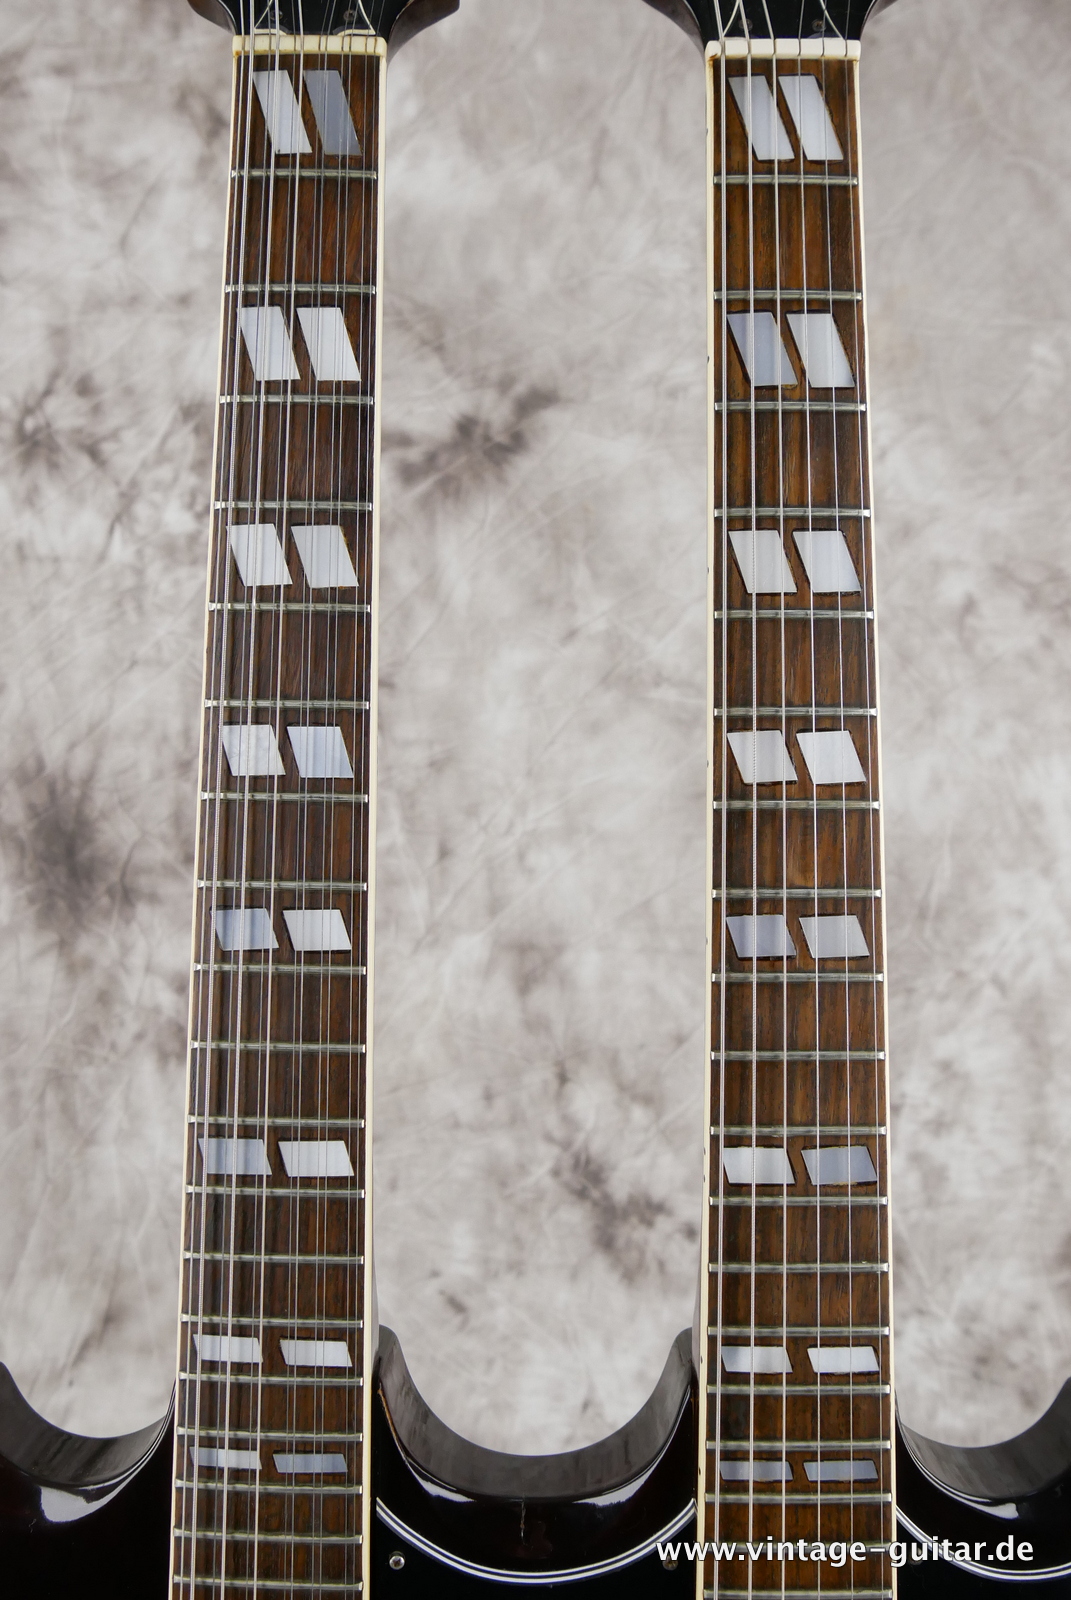 img/vintage/5195/Ibanez_Mod_2402_double_neck_12string_6string_sgstyle_sg_style_1970_70s_stairway_to_heaven-013.JPG